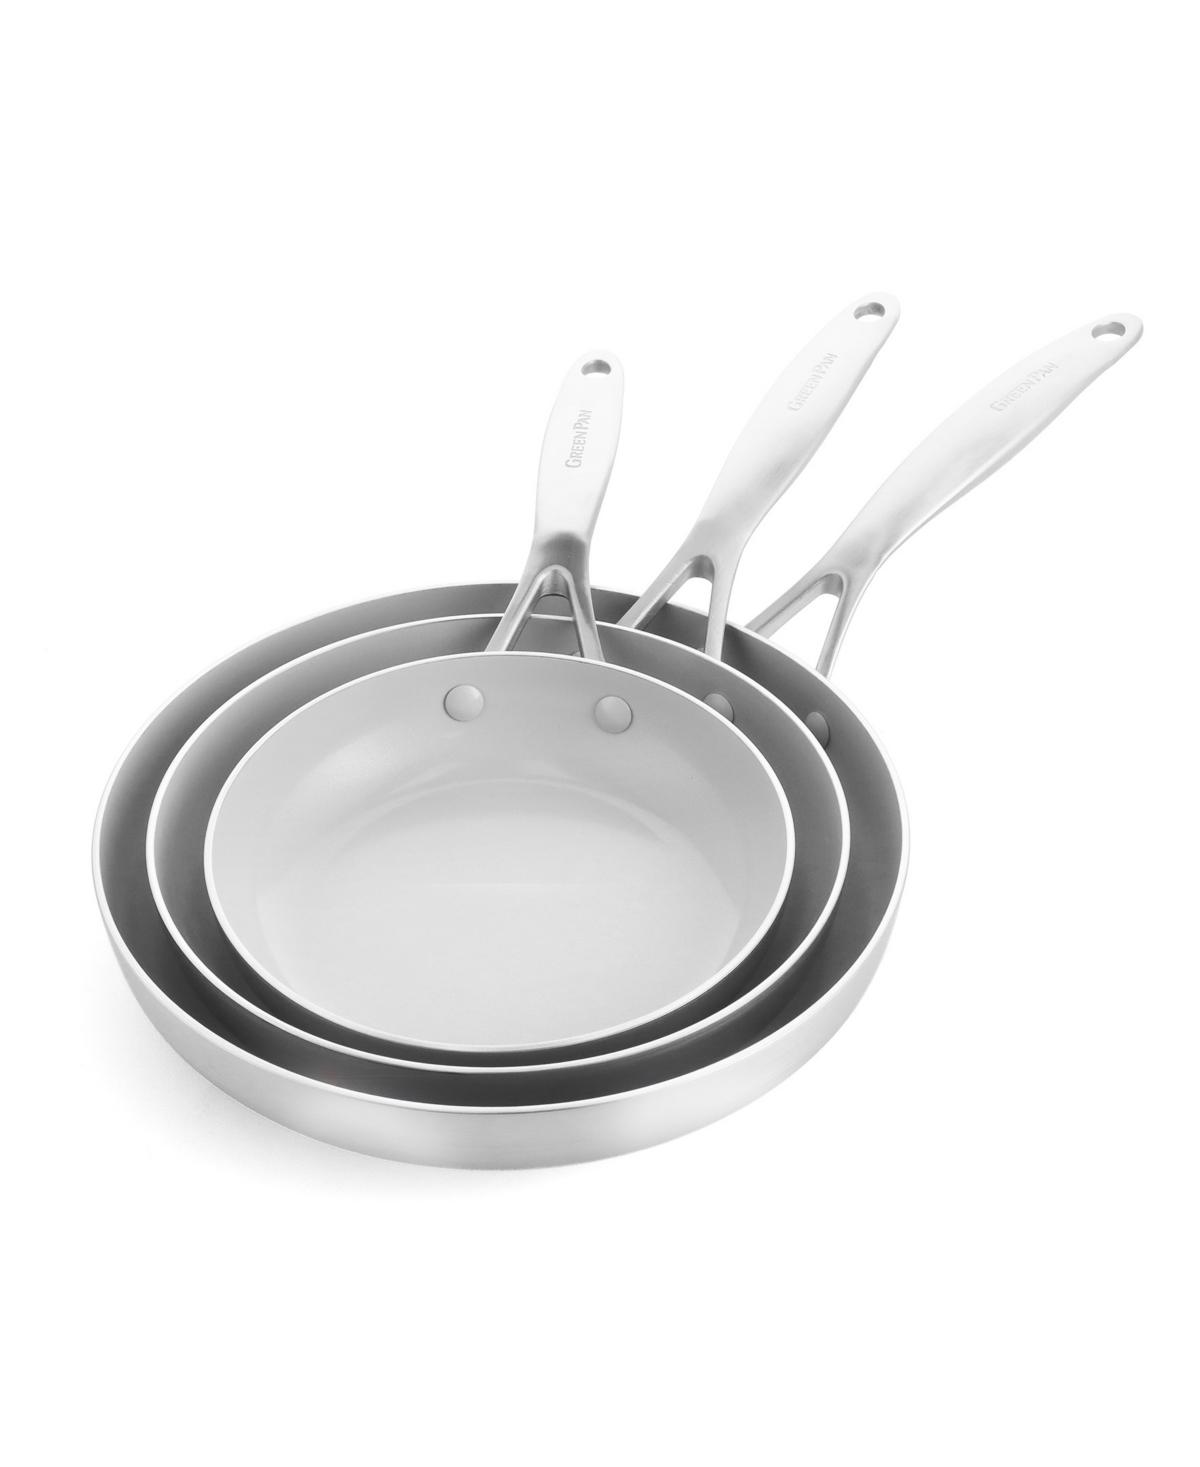 Greenpan Venice Pro Ceramic Nonstick 8", 9.5", And 12" Frypan Set In Stainless Steel